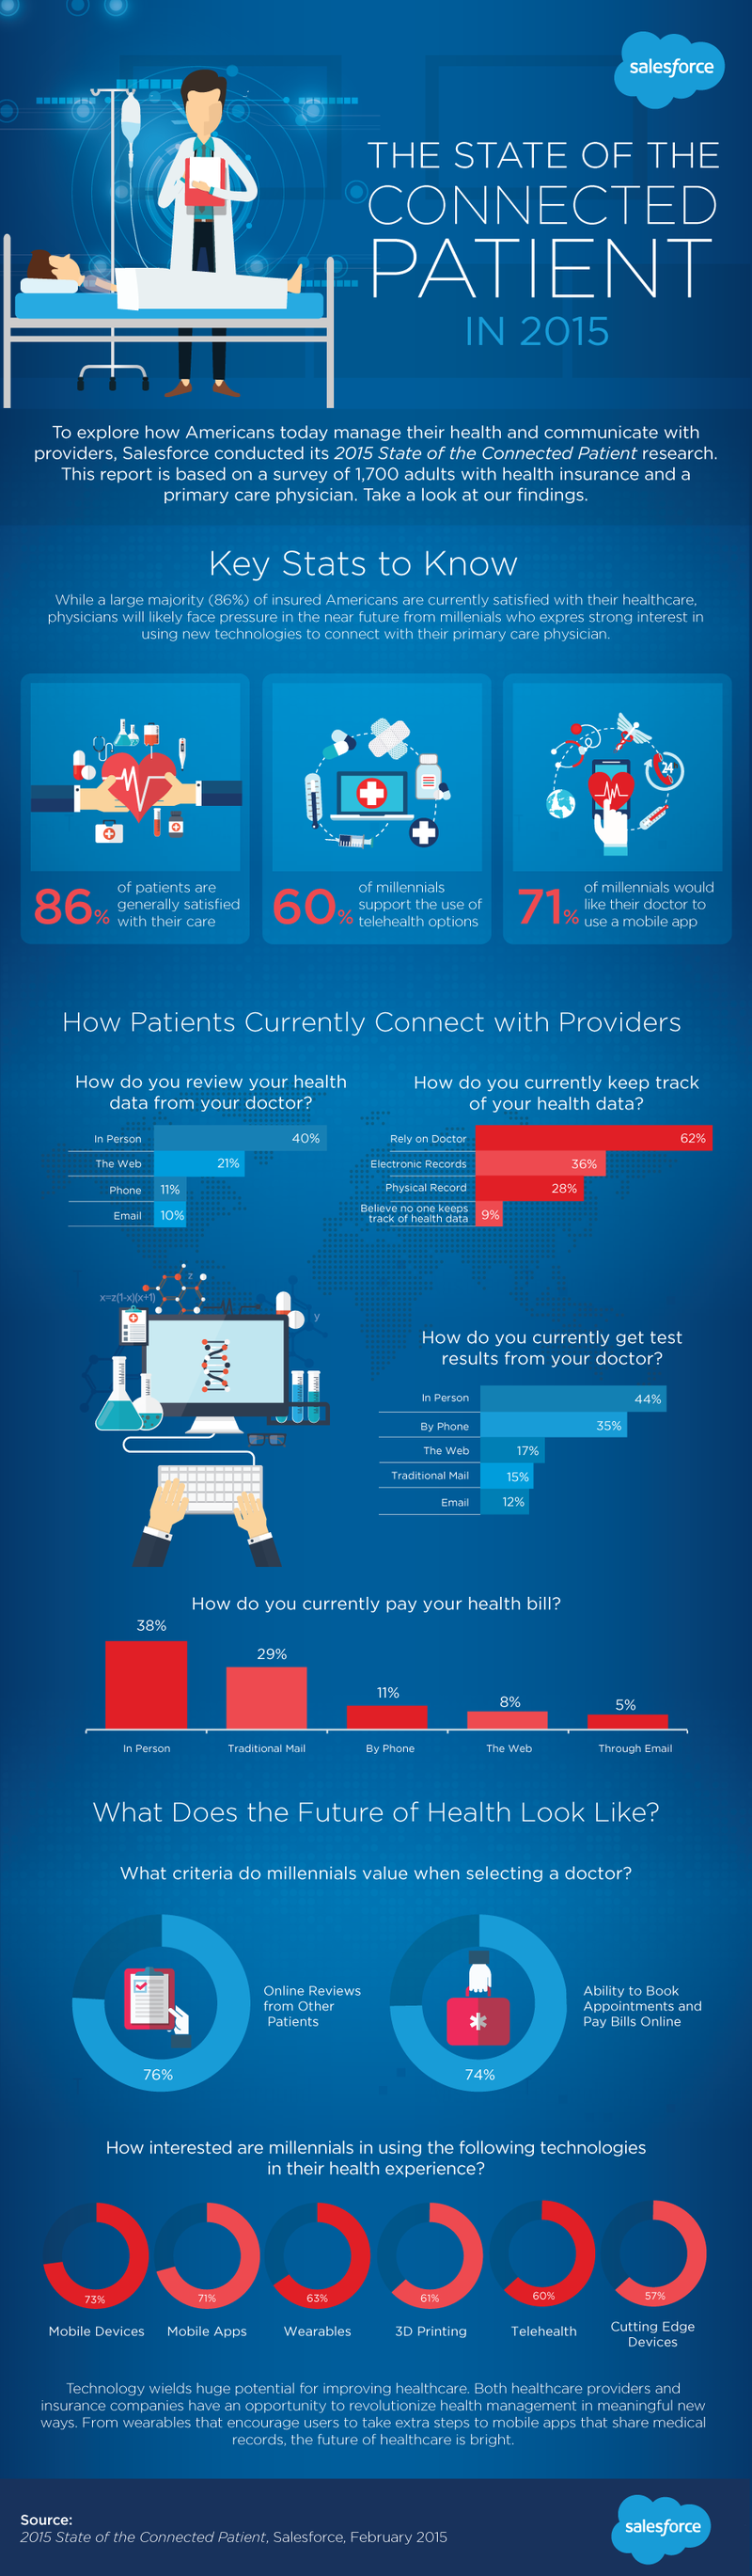 The State of the Connected Patient in 2015